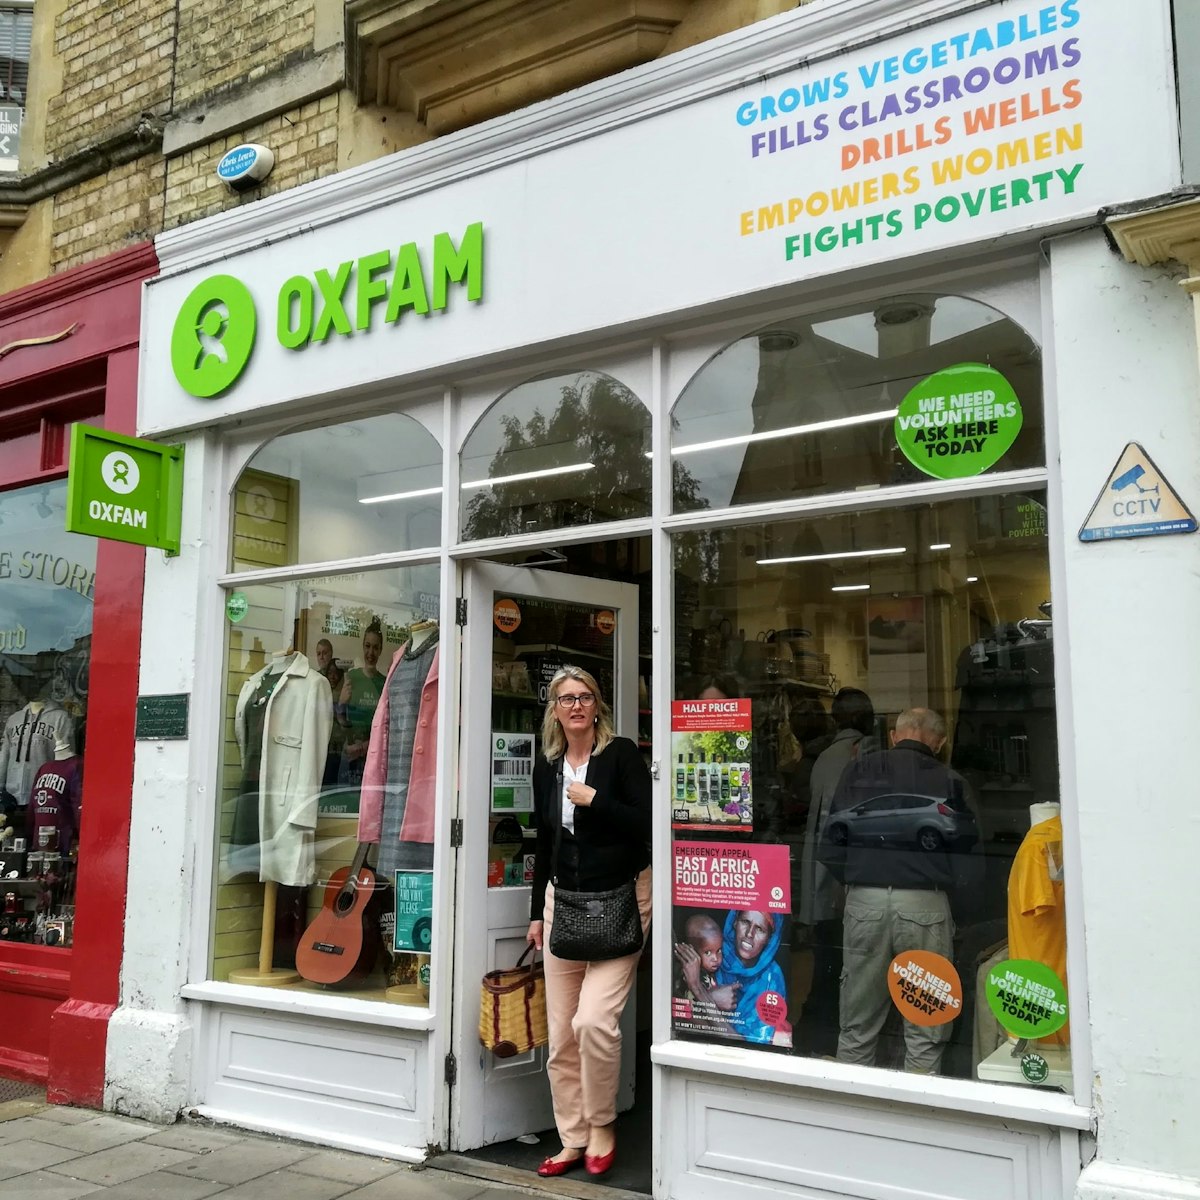 Outside the first ever Oxfam shop